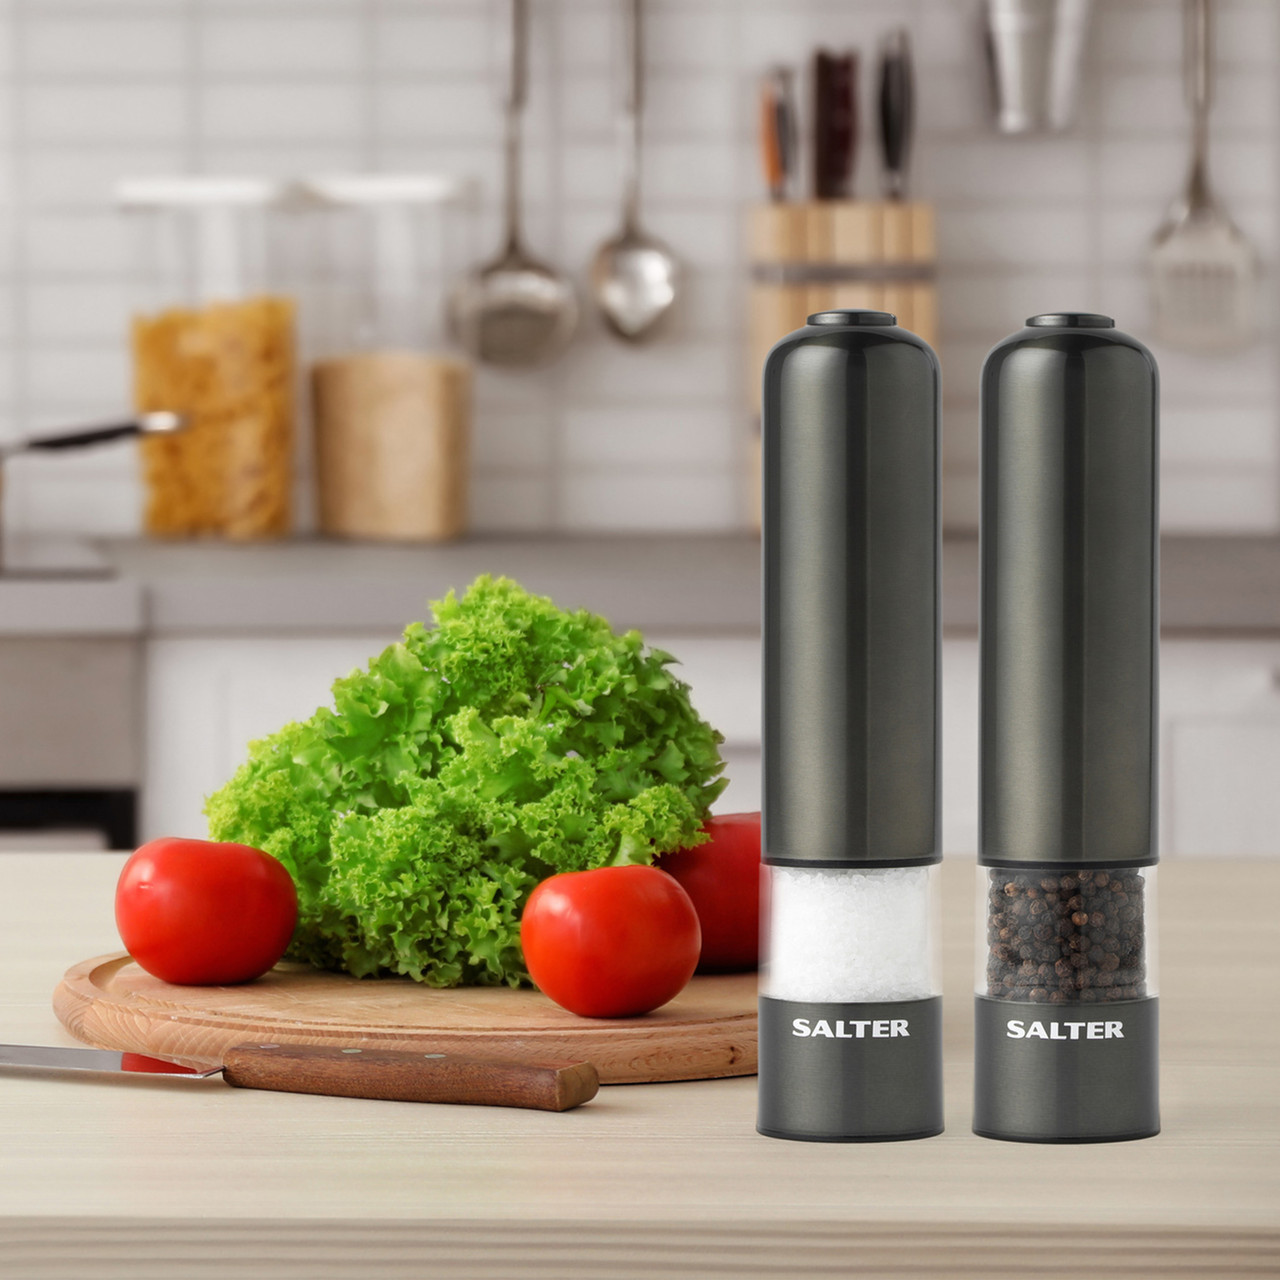 https://cdn11.bigcommerce.com/s-5vfc75n1yv/images/stencil/1280x1280/products/2210/14670/rechargeable-salt-and-pepper-mills-with-usb-cable-black-salter-7538-gmxr-5010777154627__63329.1663941704.jpg?c=1